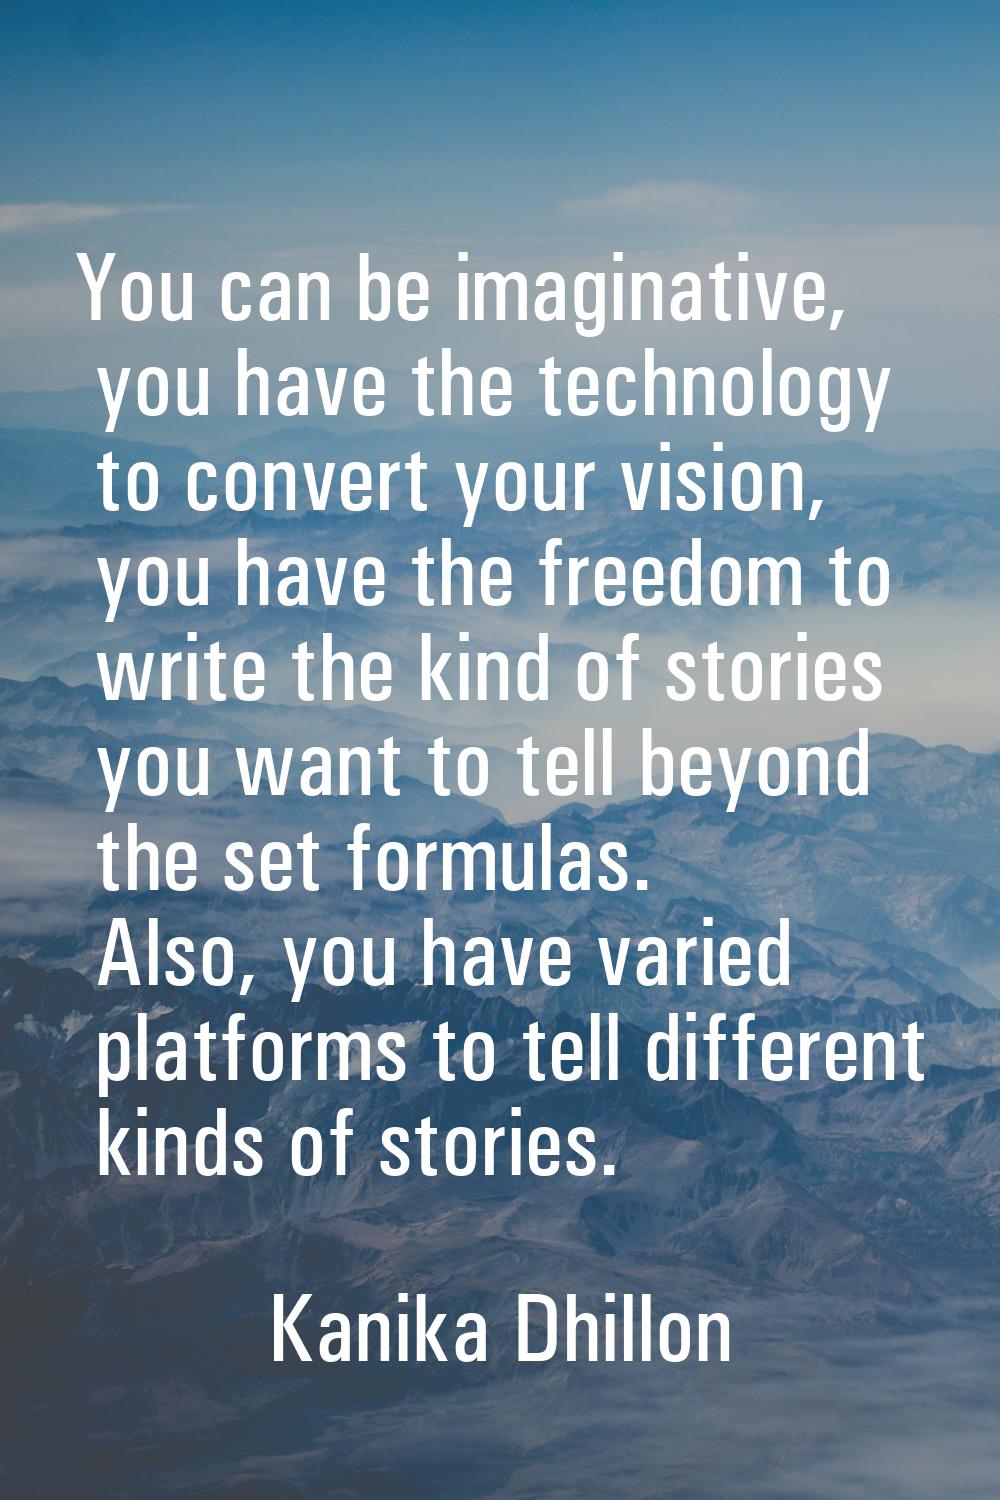 You can be imaginative, you have the technology to convert your vision, you have the freedom to wri